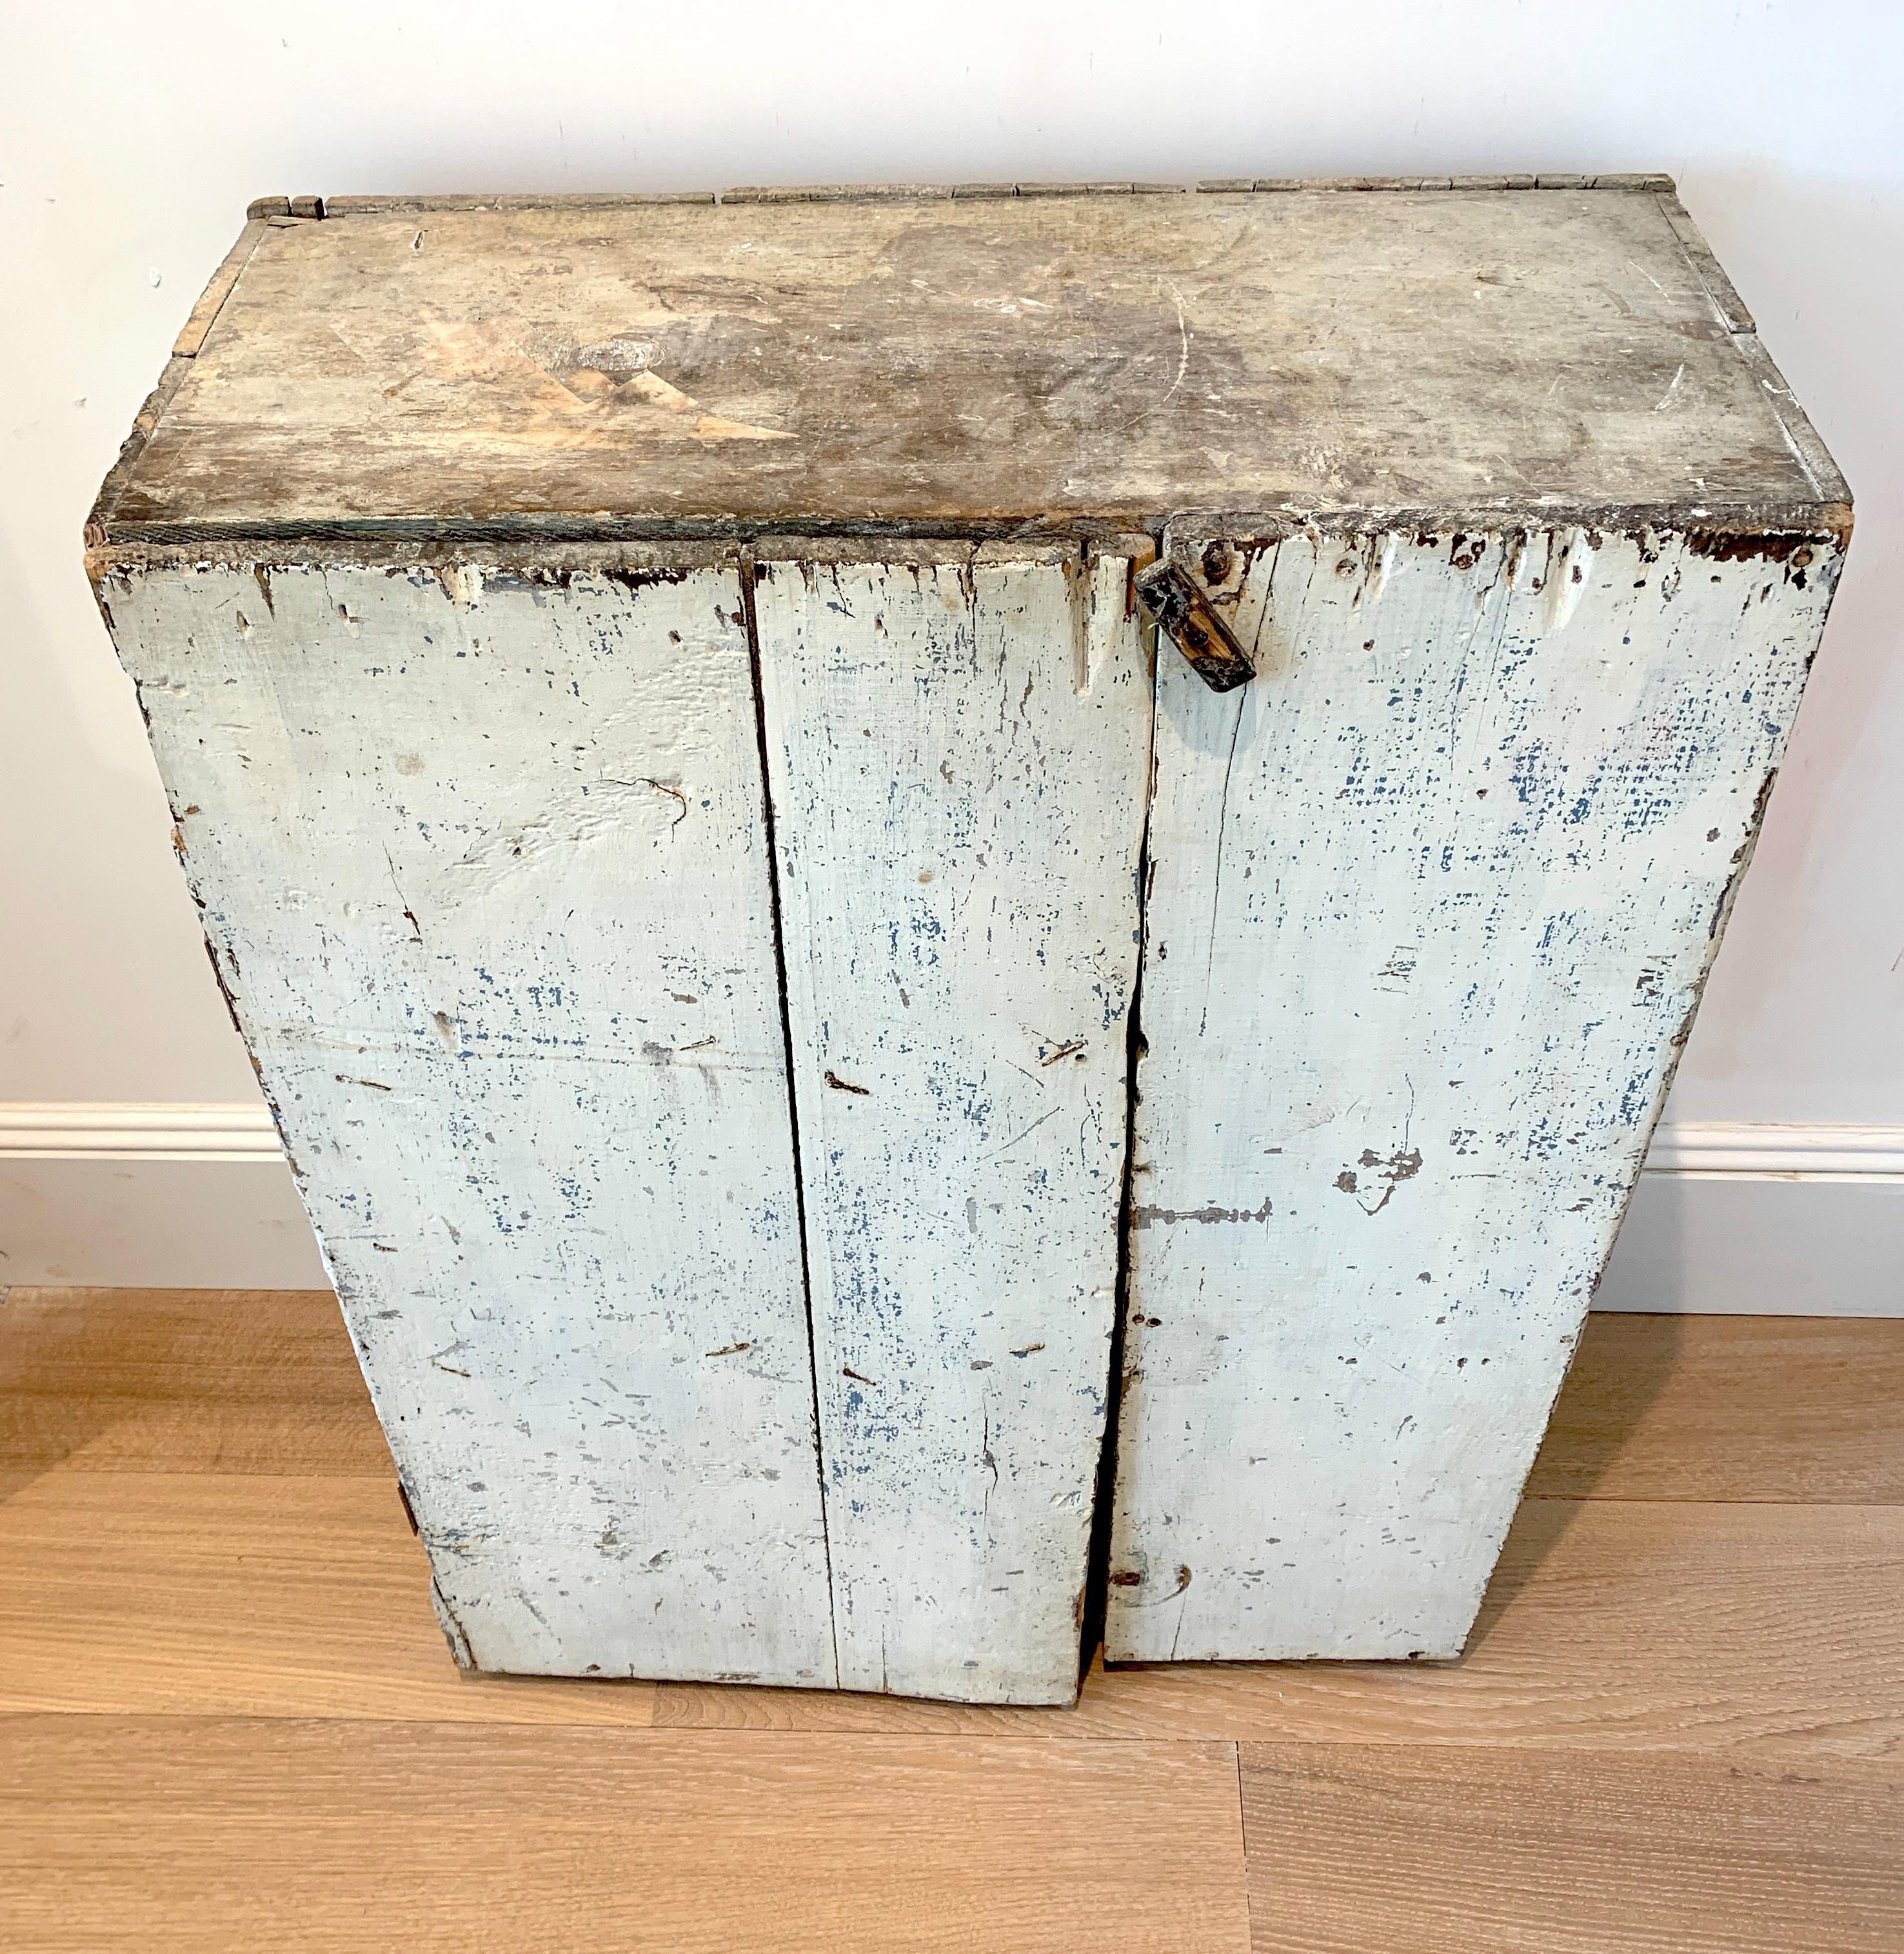 American Folk-Art Primitive, this cabinet features an authentic patina of distressed white over light blue hues. All wood inside. Hinges and clasp are functional. Dress it up with new hardware or use it as-is. Once mounted it is sturdy and solid.